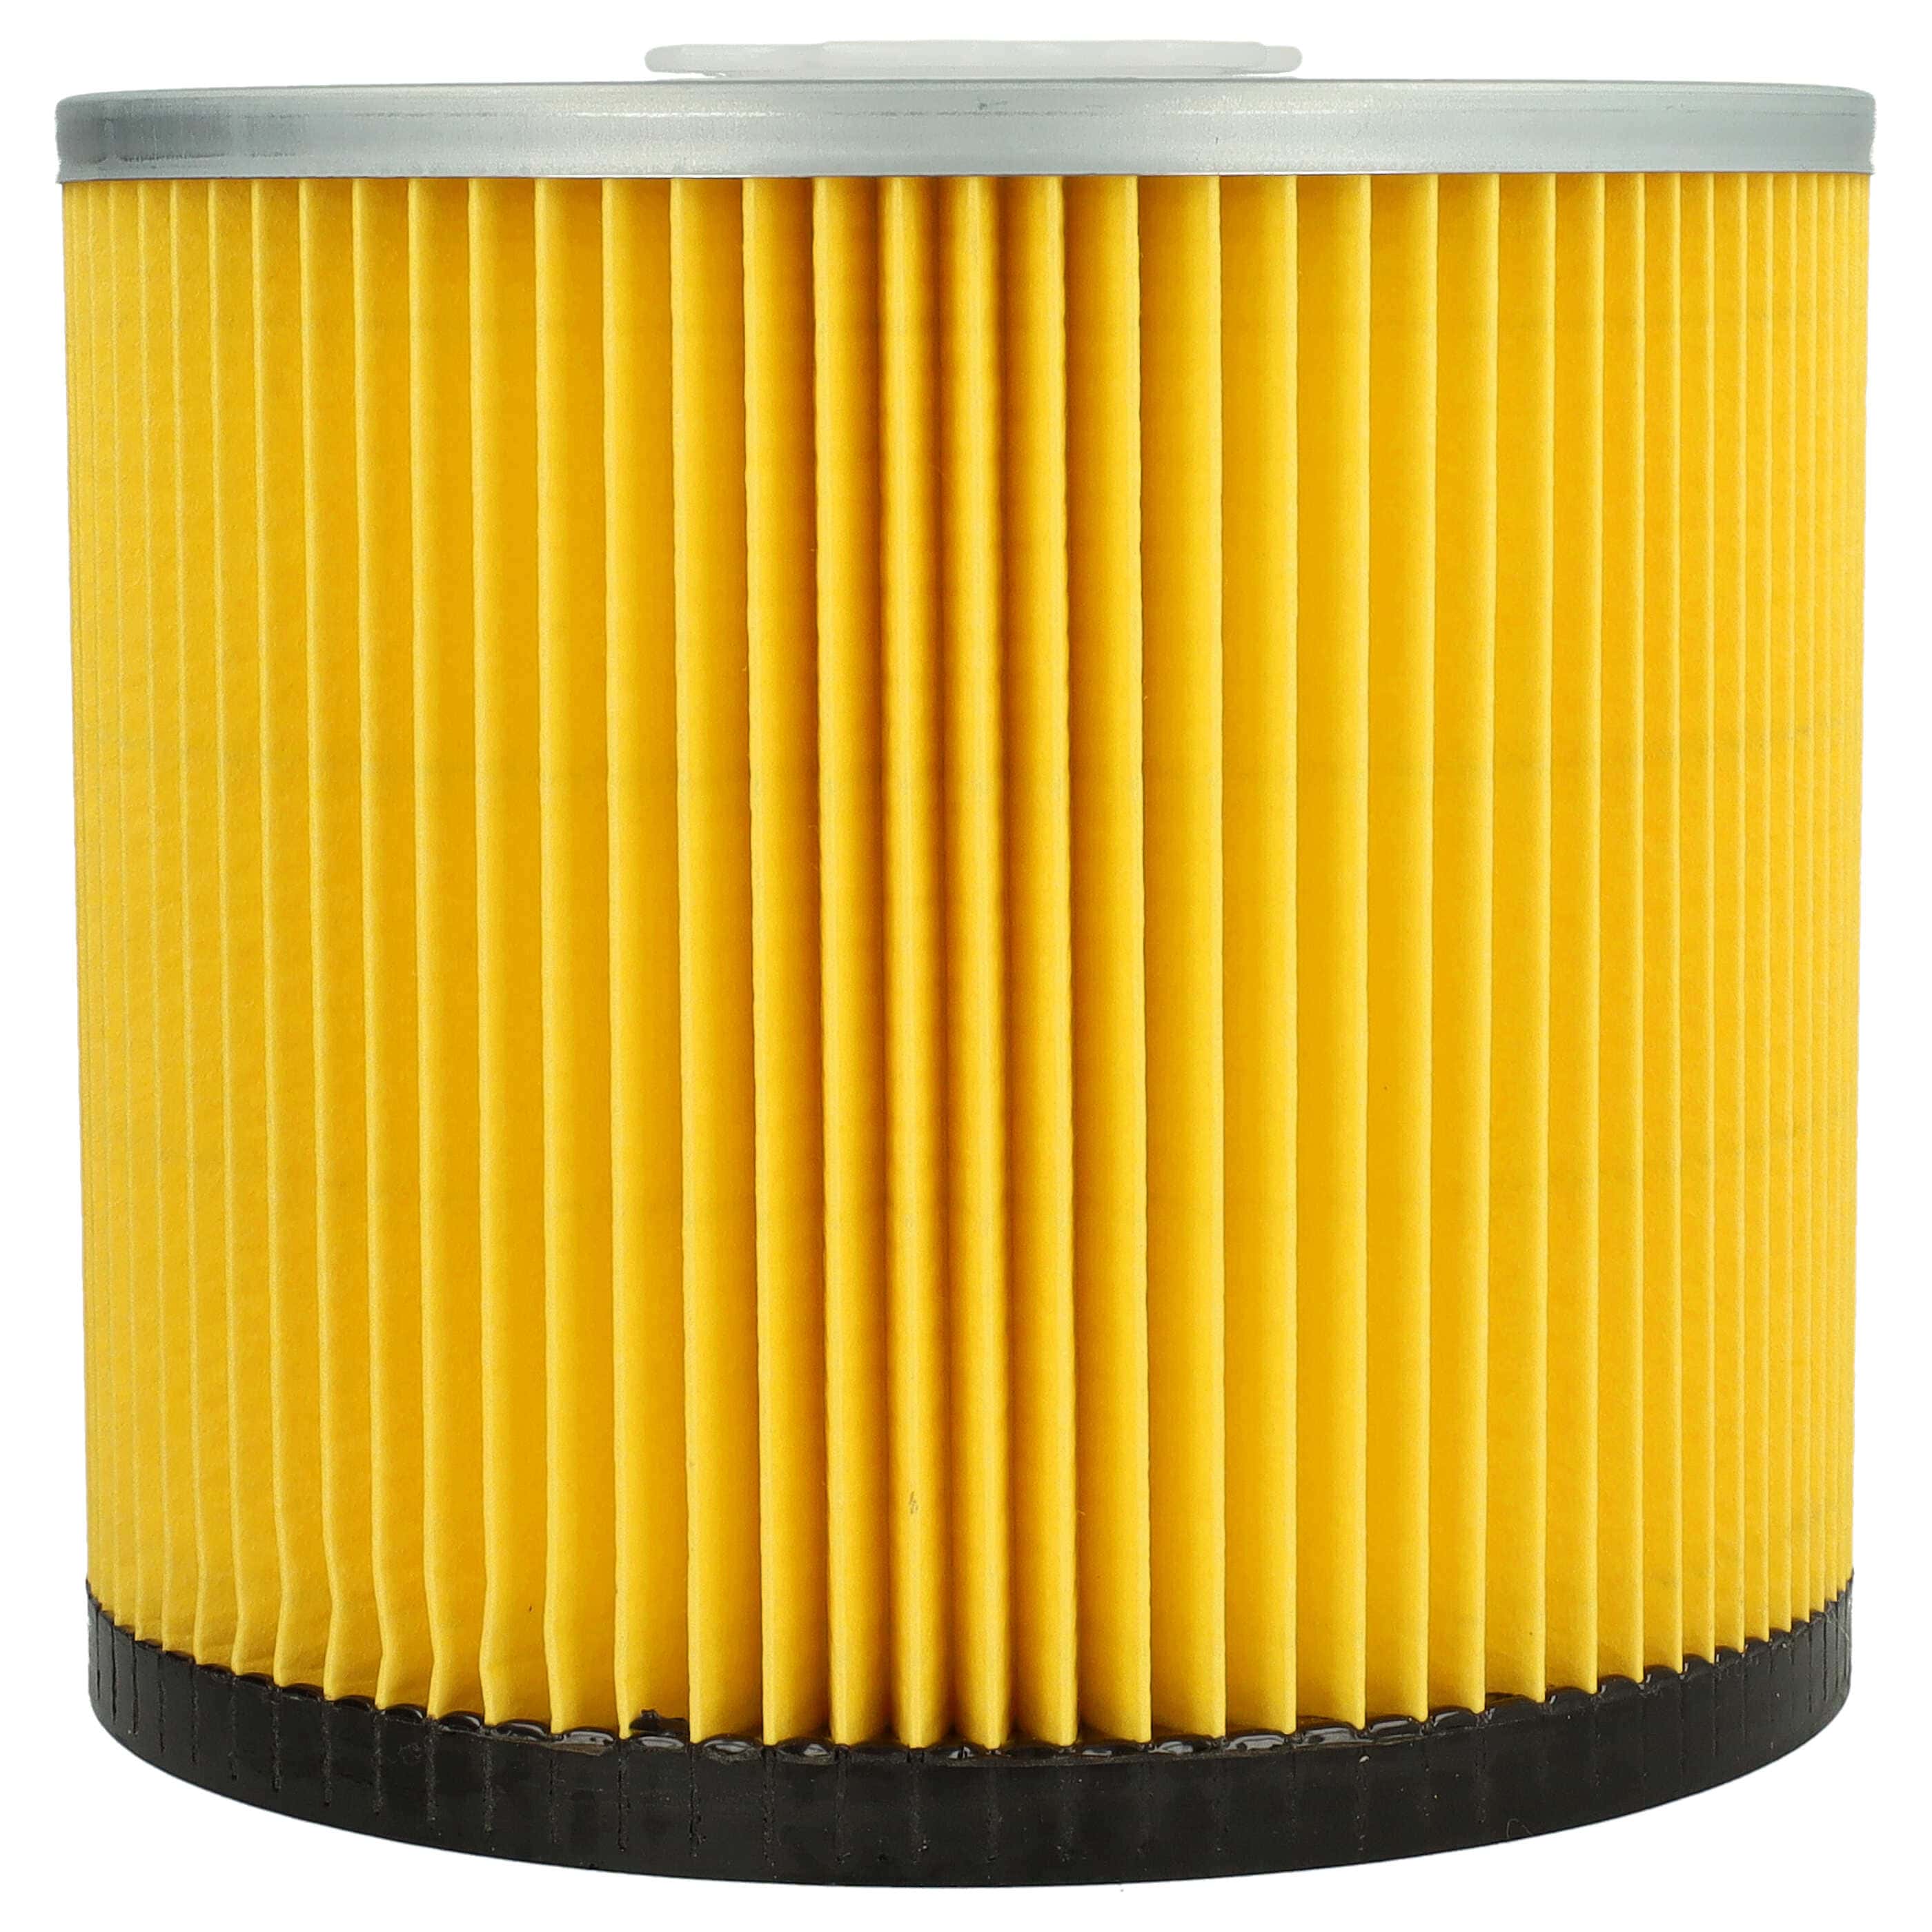 1x cartridge filter replaces Bosch 2 607 432 001, 2607432001 for BoschVacuum Cleaner, black / silver / yellow